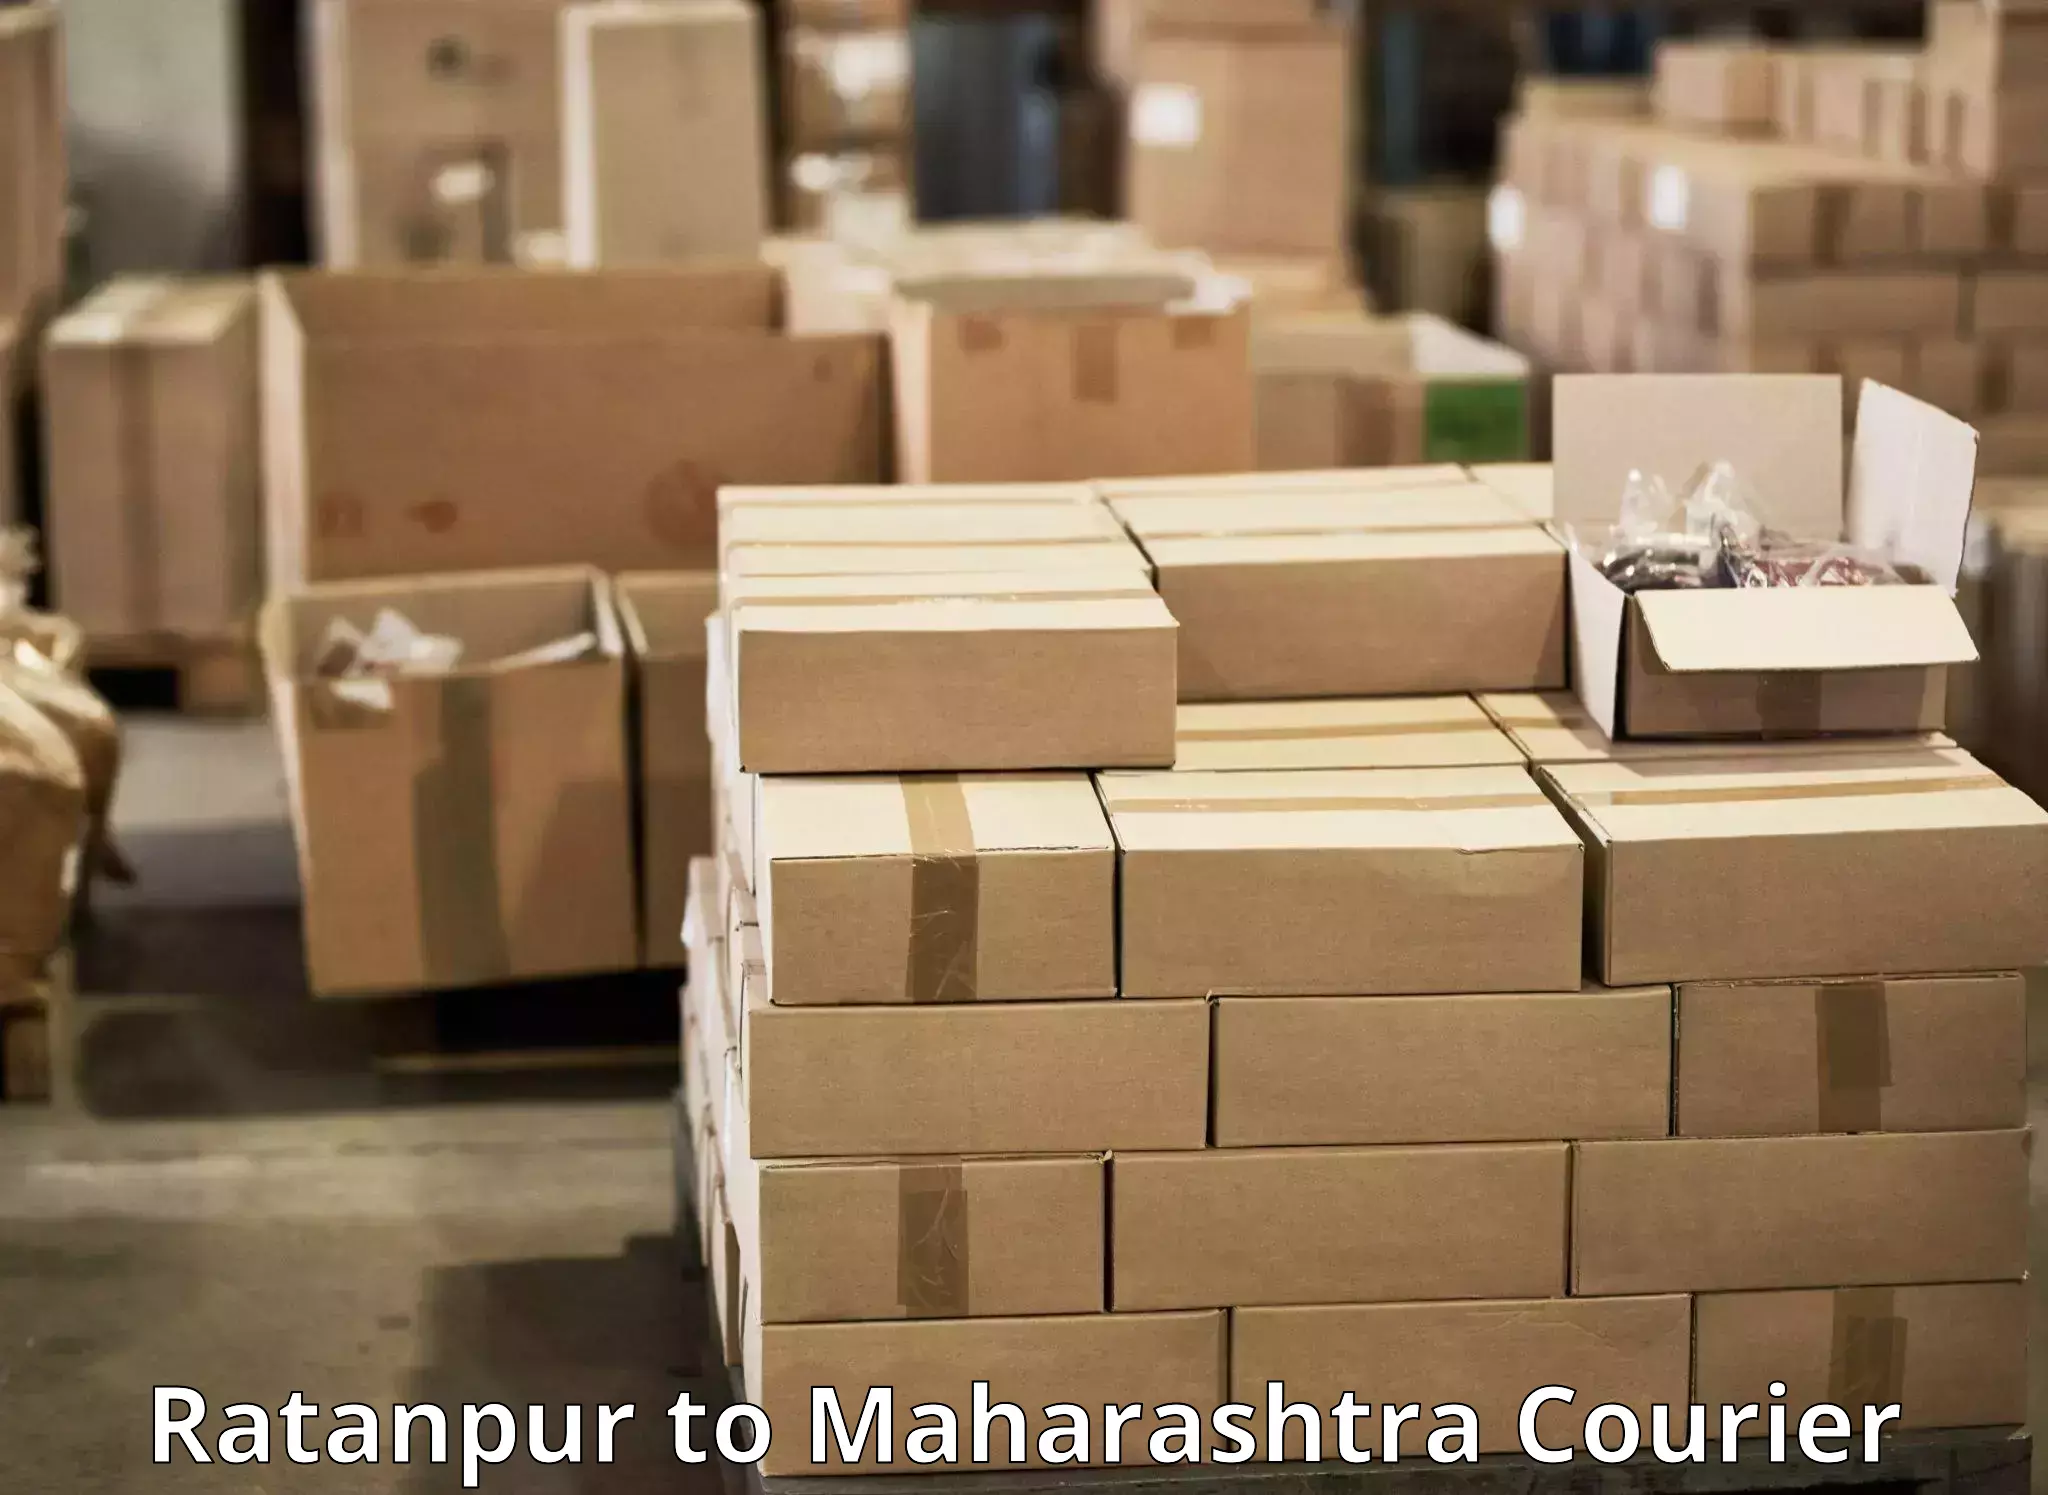 Express delivery capabilities in Ratanpur to Bhokar